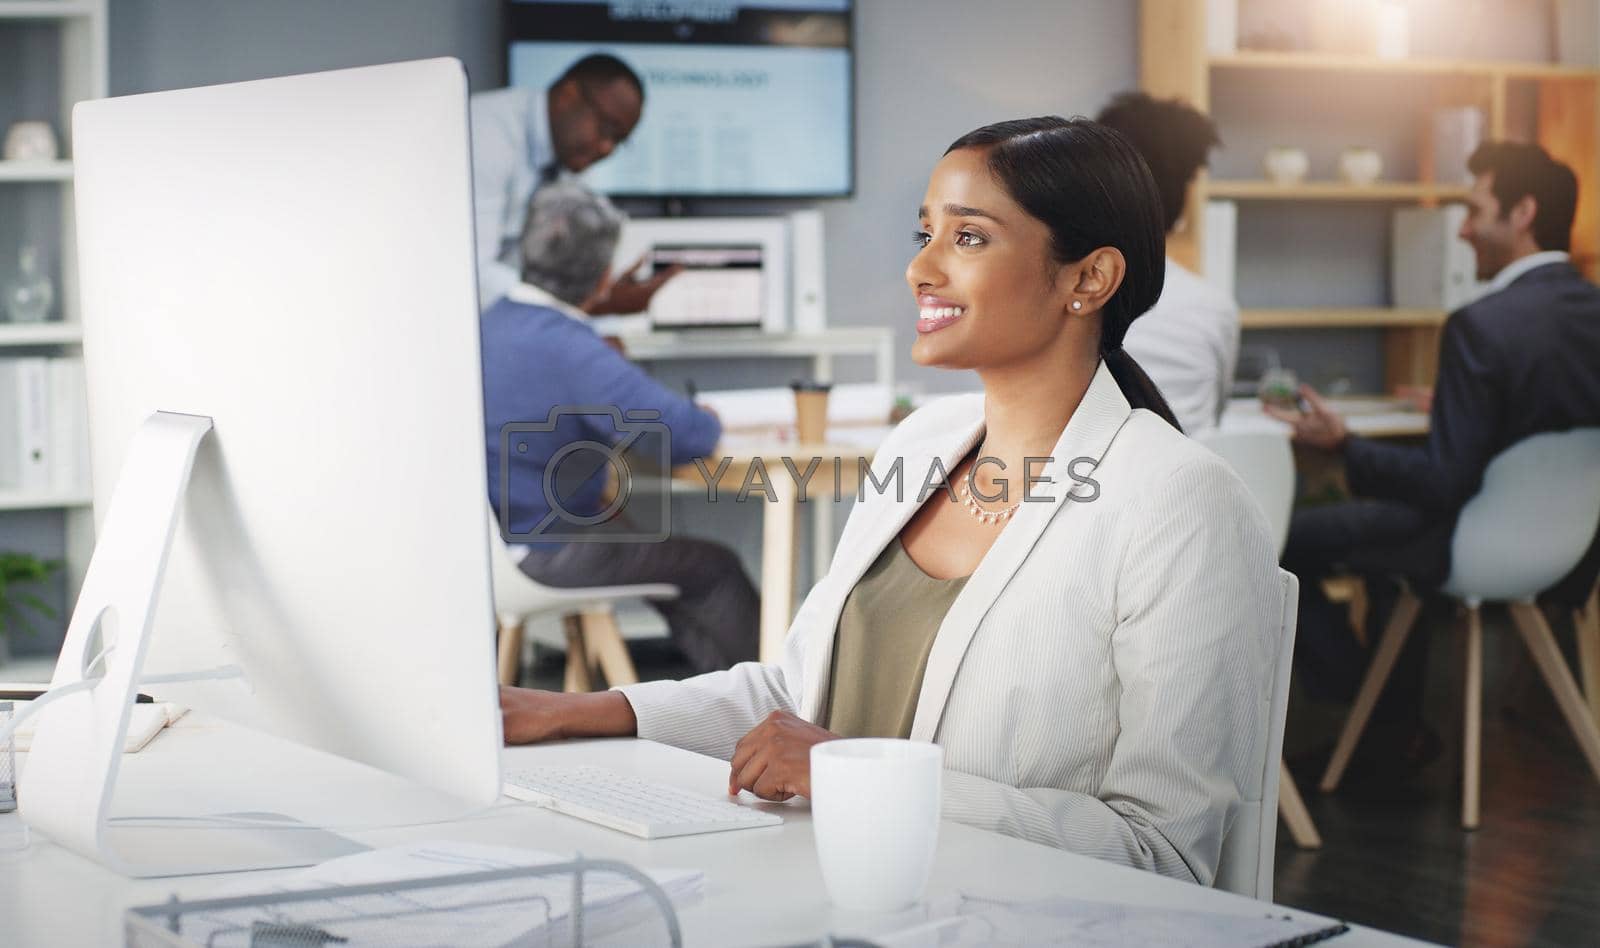 Royalty free image of Positivity improves productivity. Shot of a young businesswoman using a computer at her work desk. by YuriArcurs